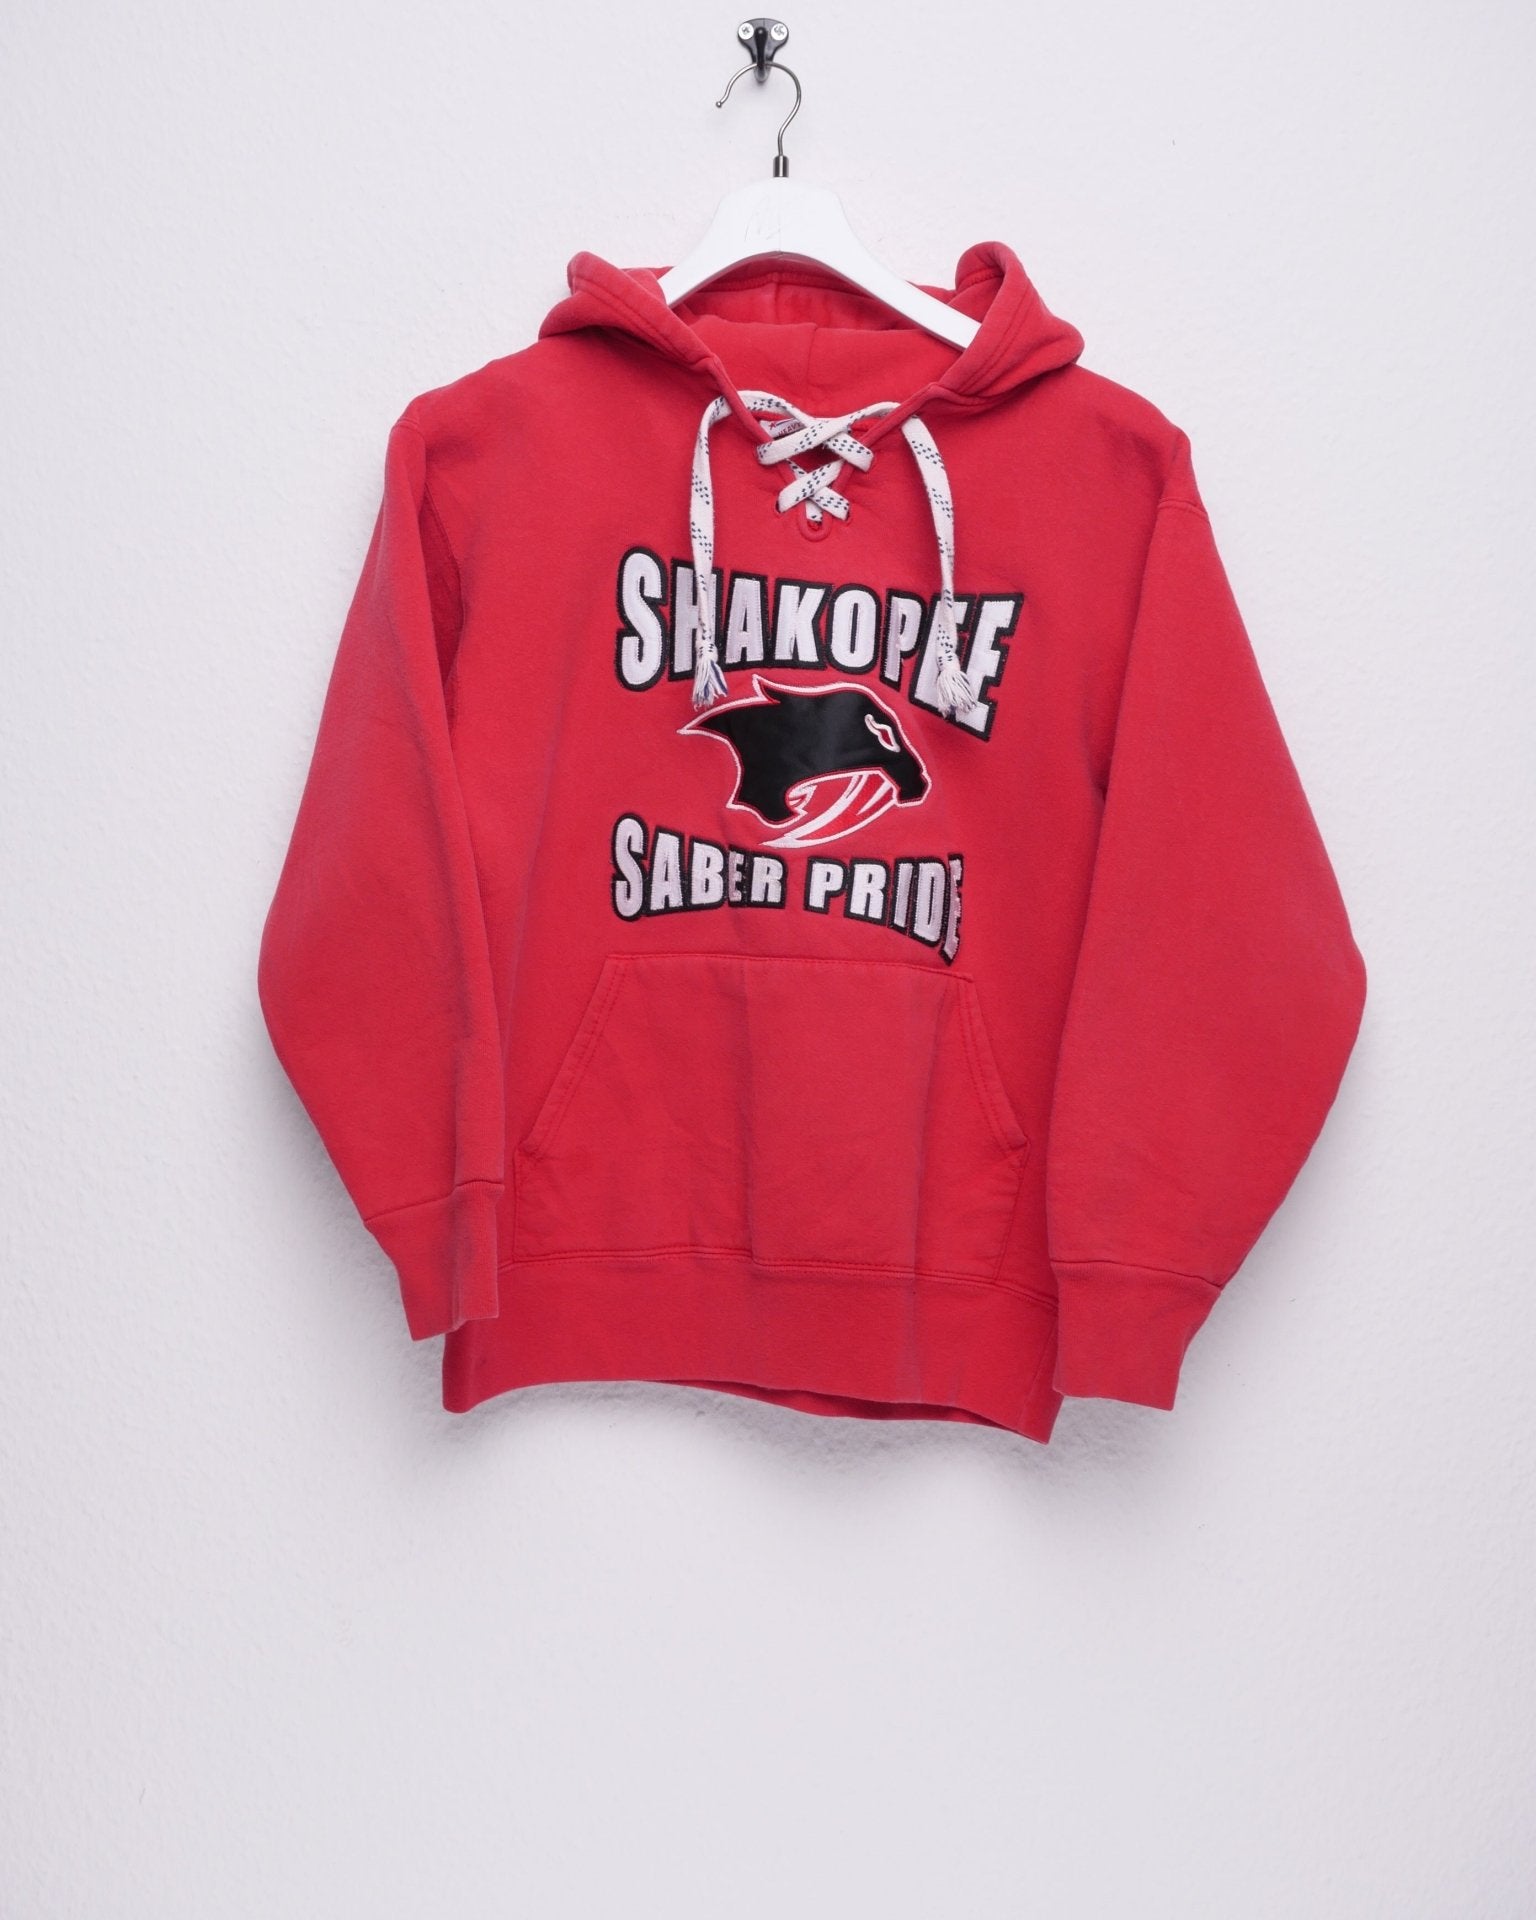 Eagle 'Shakopee Saber Pride' embroidered red Hoodie - Peeces